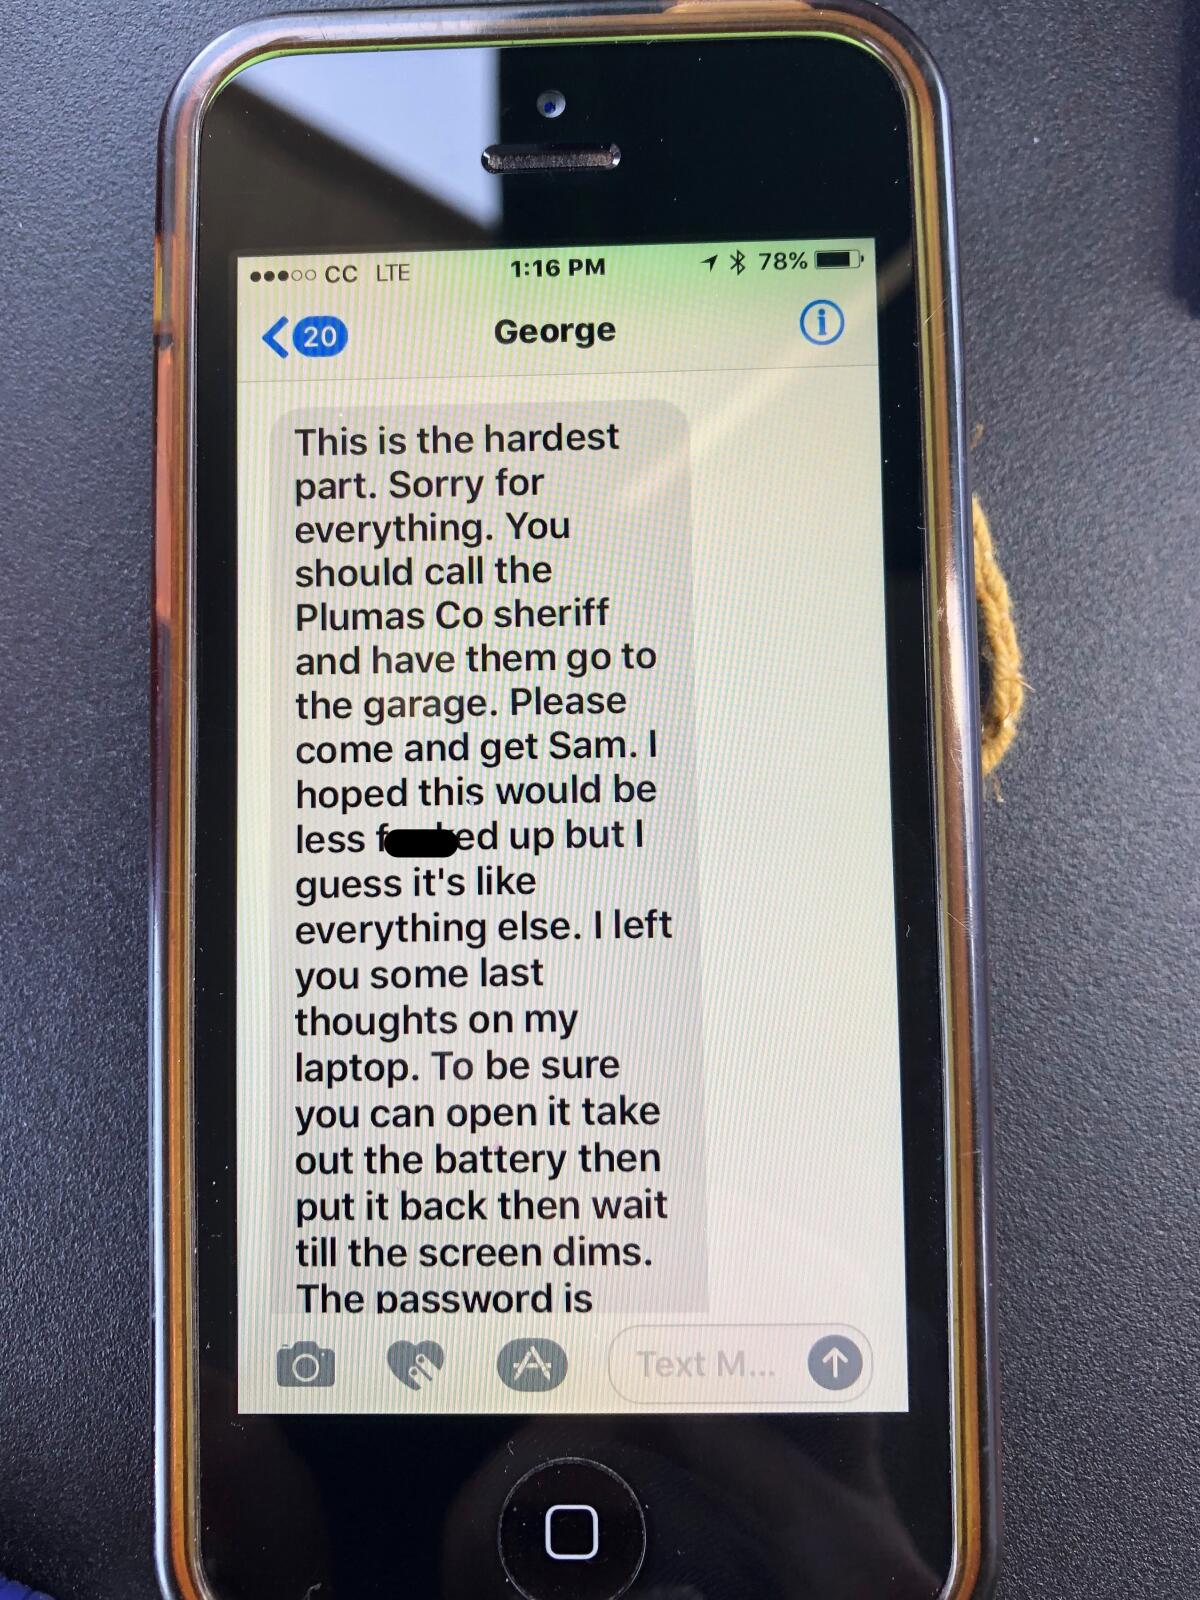 George Quinn texted his sister on the day he died, asking her to contact the Plumas County Sheriff's Department.